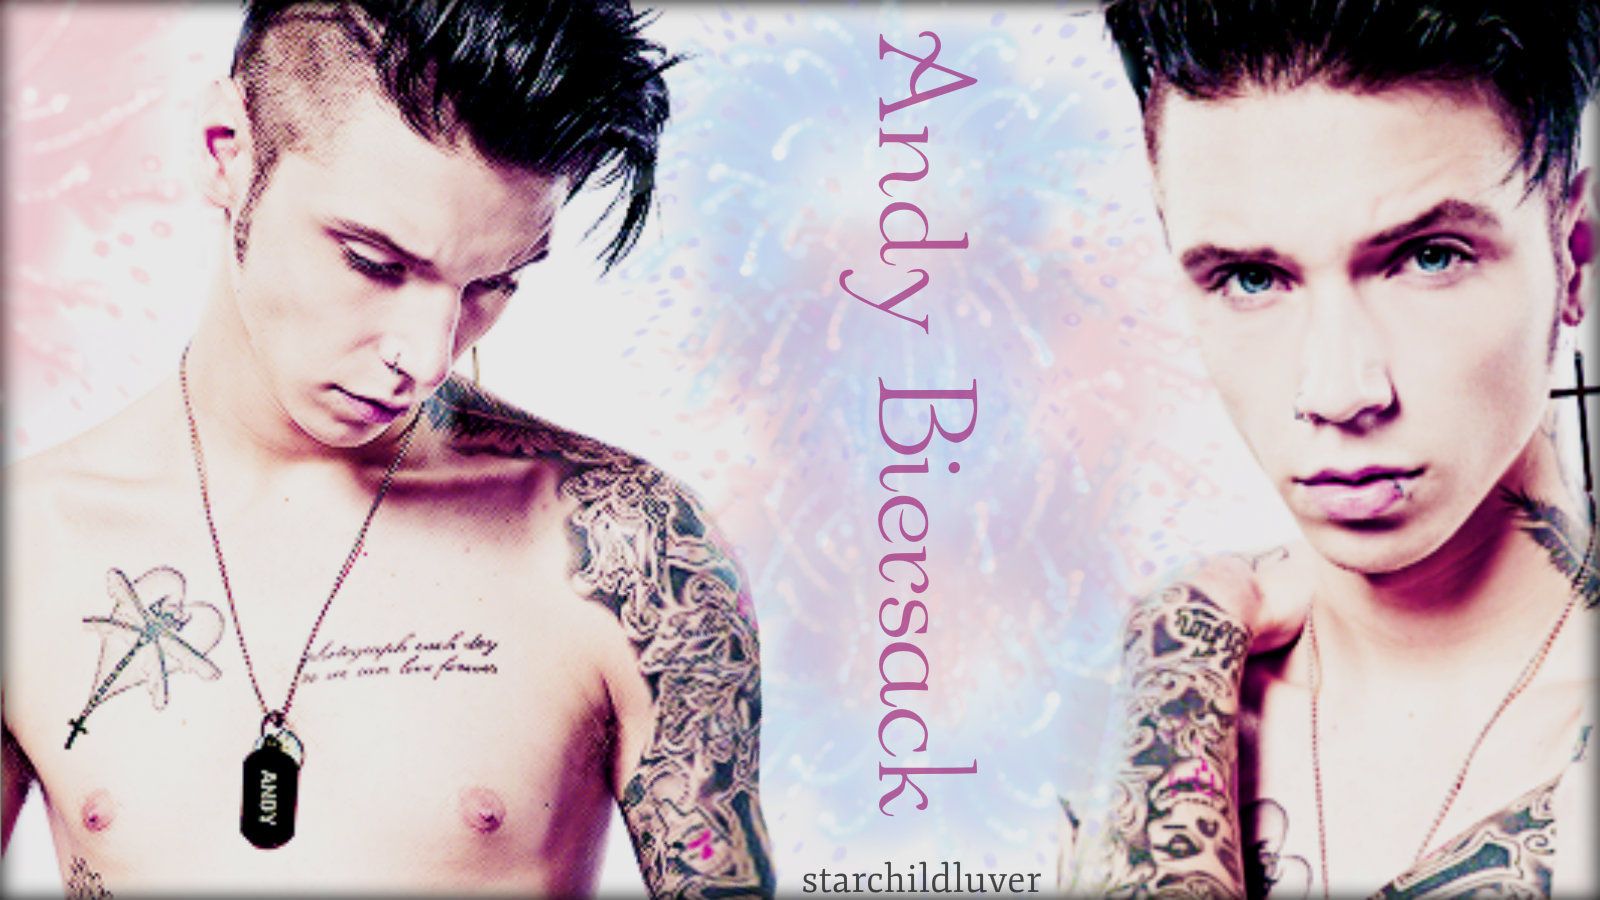 Wallpaper of Andy Biersack for fans of Black Veil Brides. 